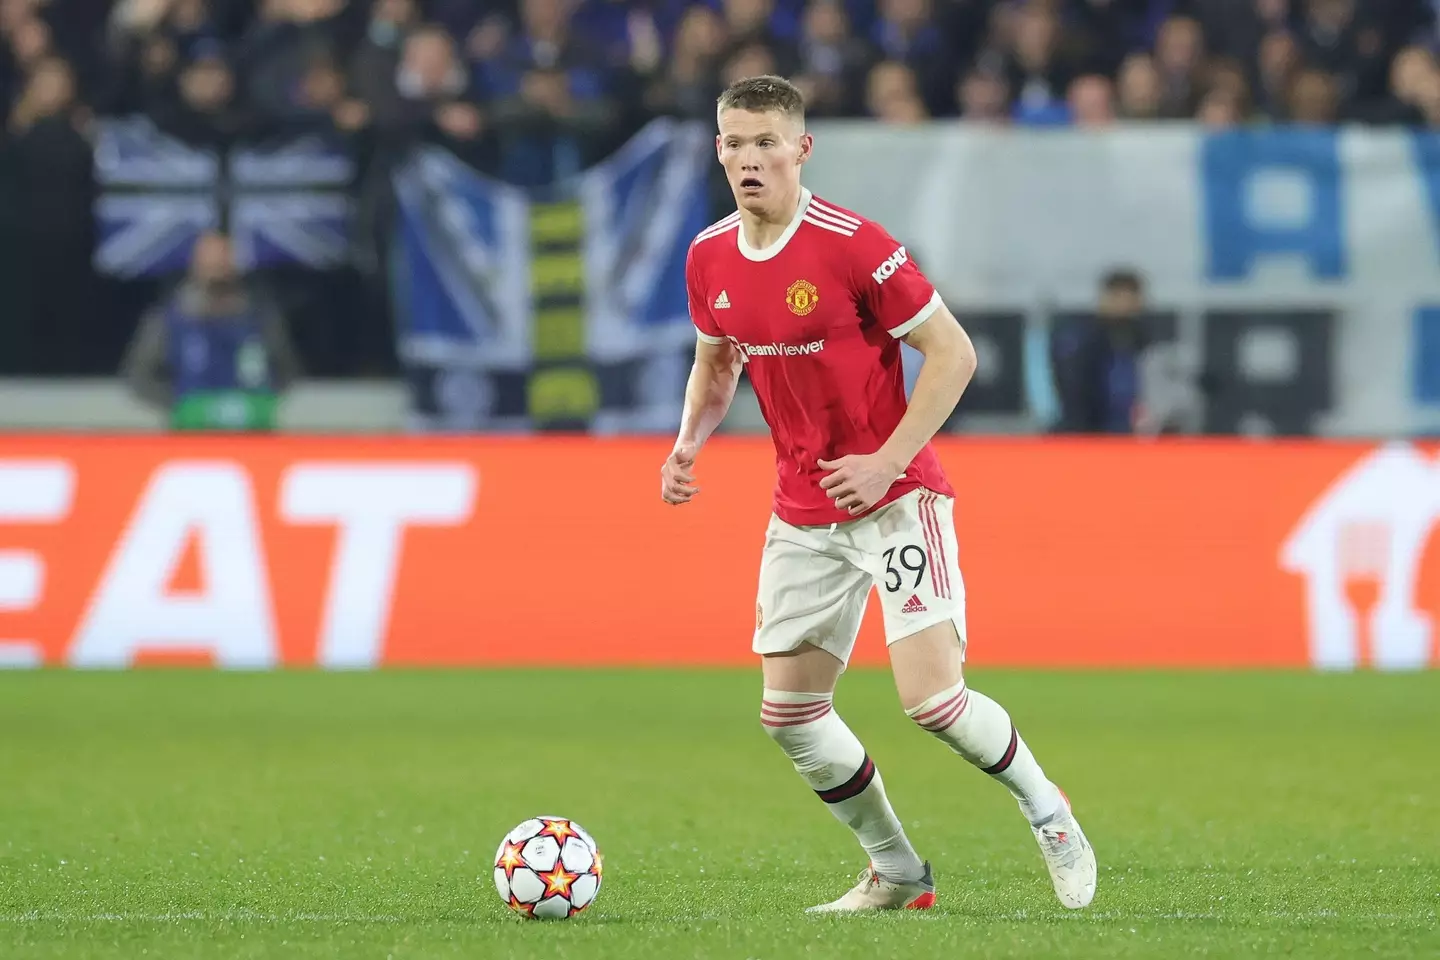 Scott McTominay is one of a few midfielders left at Manchester United. (Alamy)